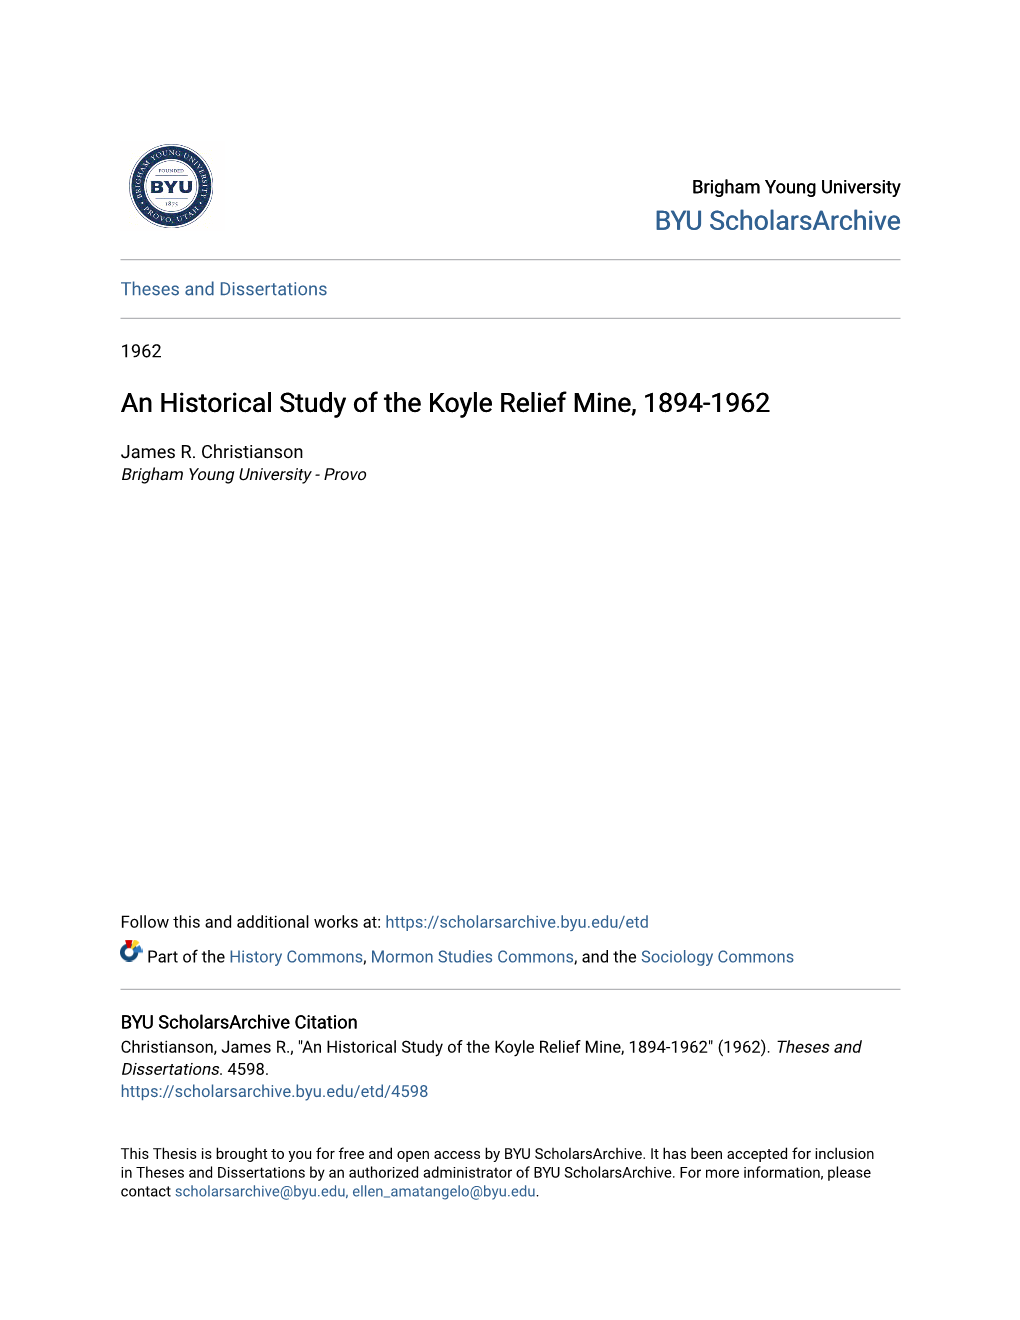 An Historical Study of the Koyle Relief Mine, 1894-1962